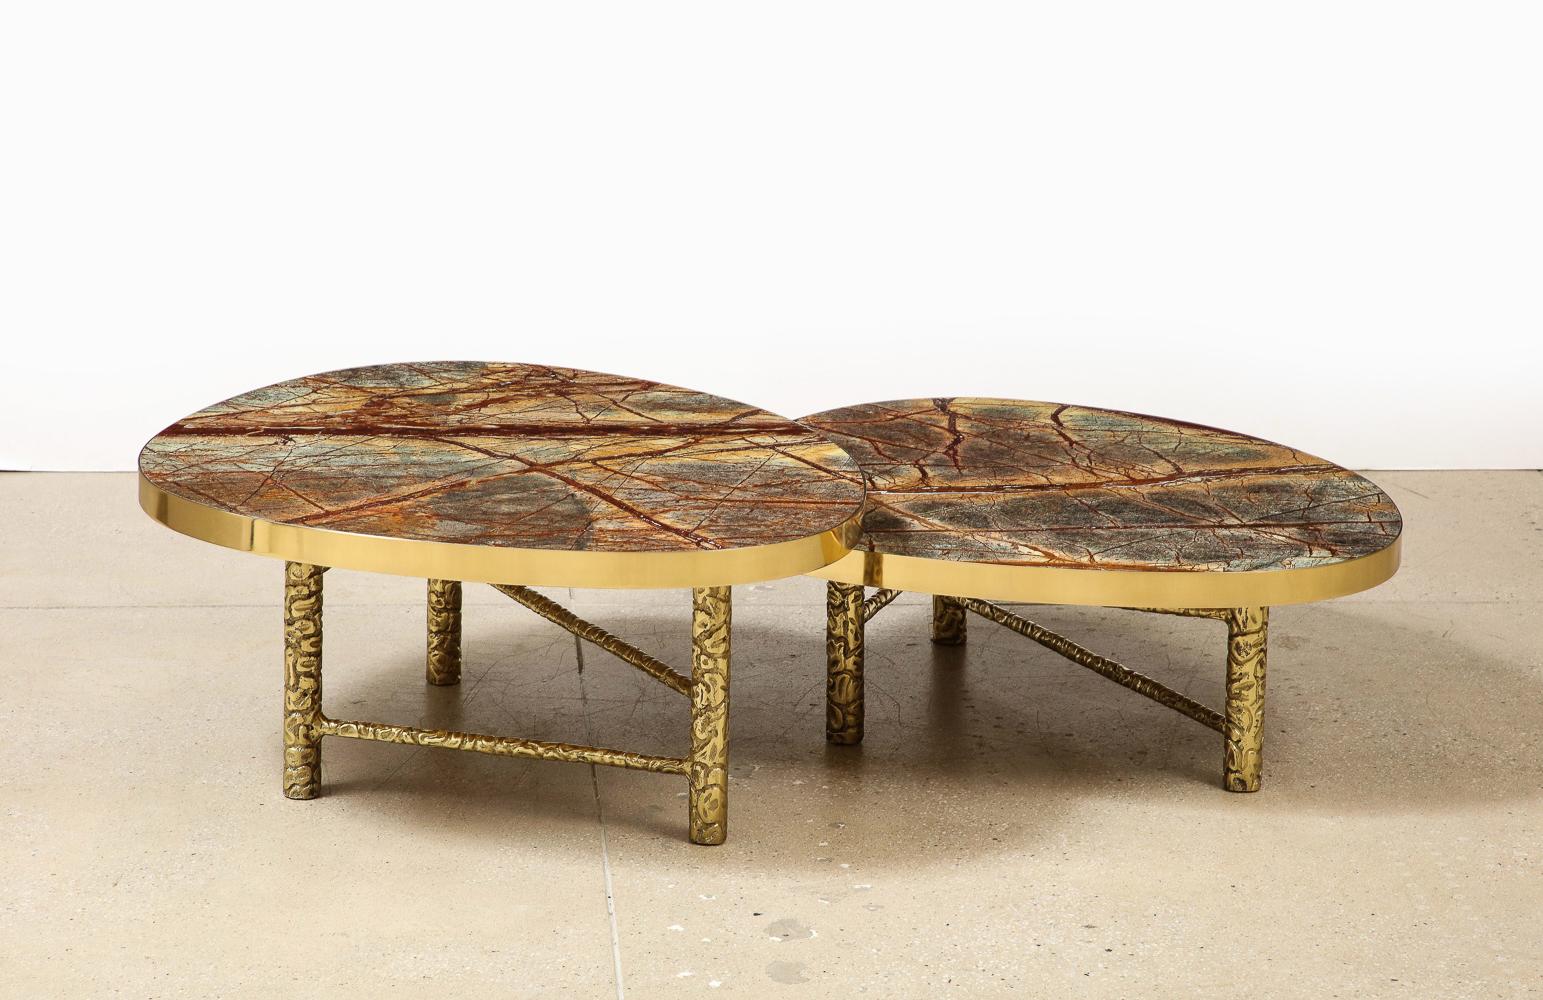 Rainforest marble, textured & polished brass. 2-piece set of nesting tables with 3 legs per table. These can be set in many directions. Made to order with a 15-20 week lead-time. Ask us about our in-stock inventory of Meteoris tables.

h. 1